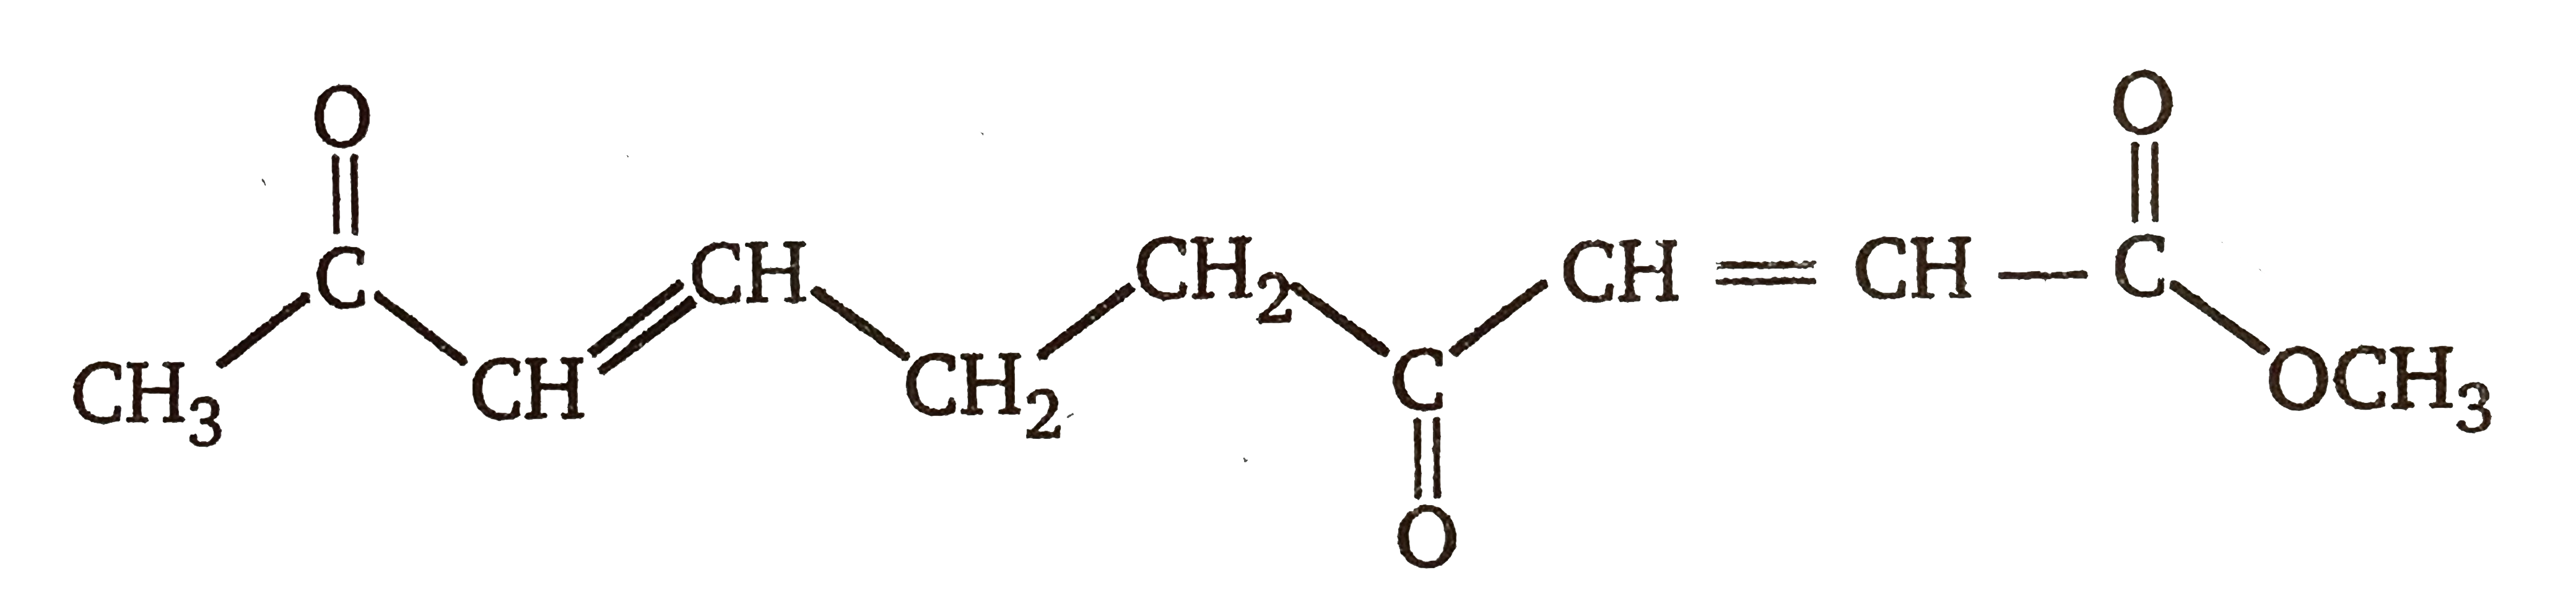 Compound A, which is a degradation product of the antibiotic vermiculine has following structure